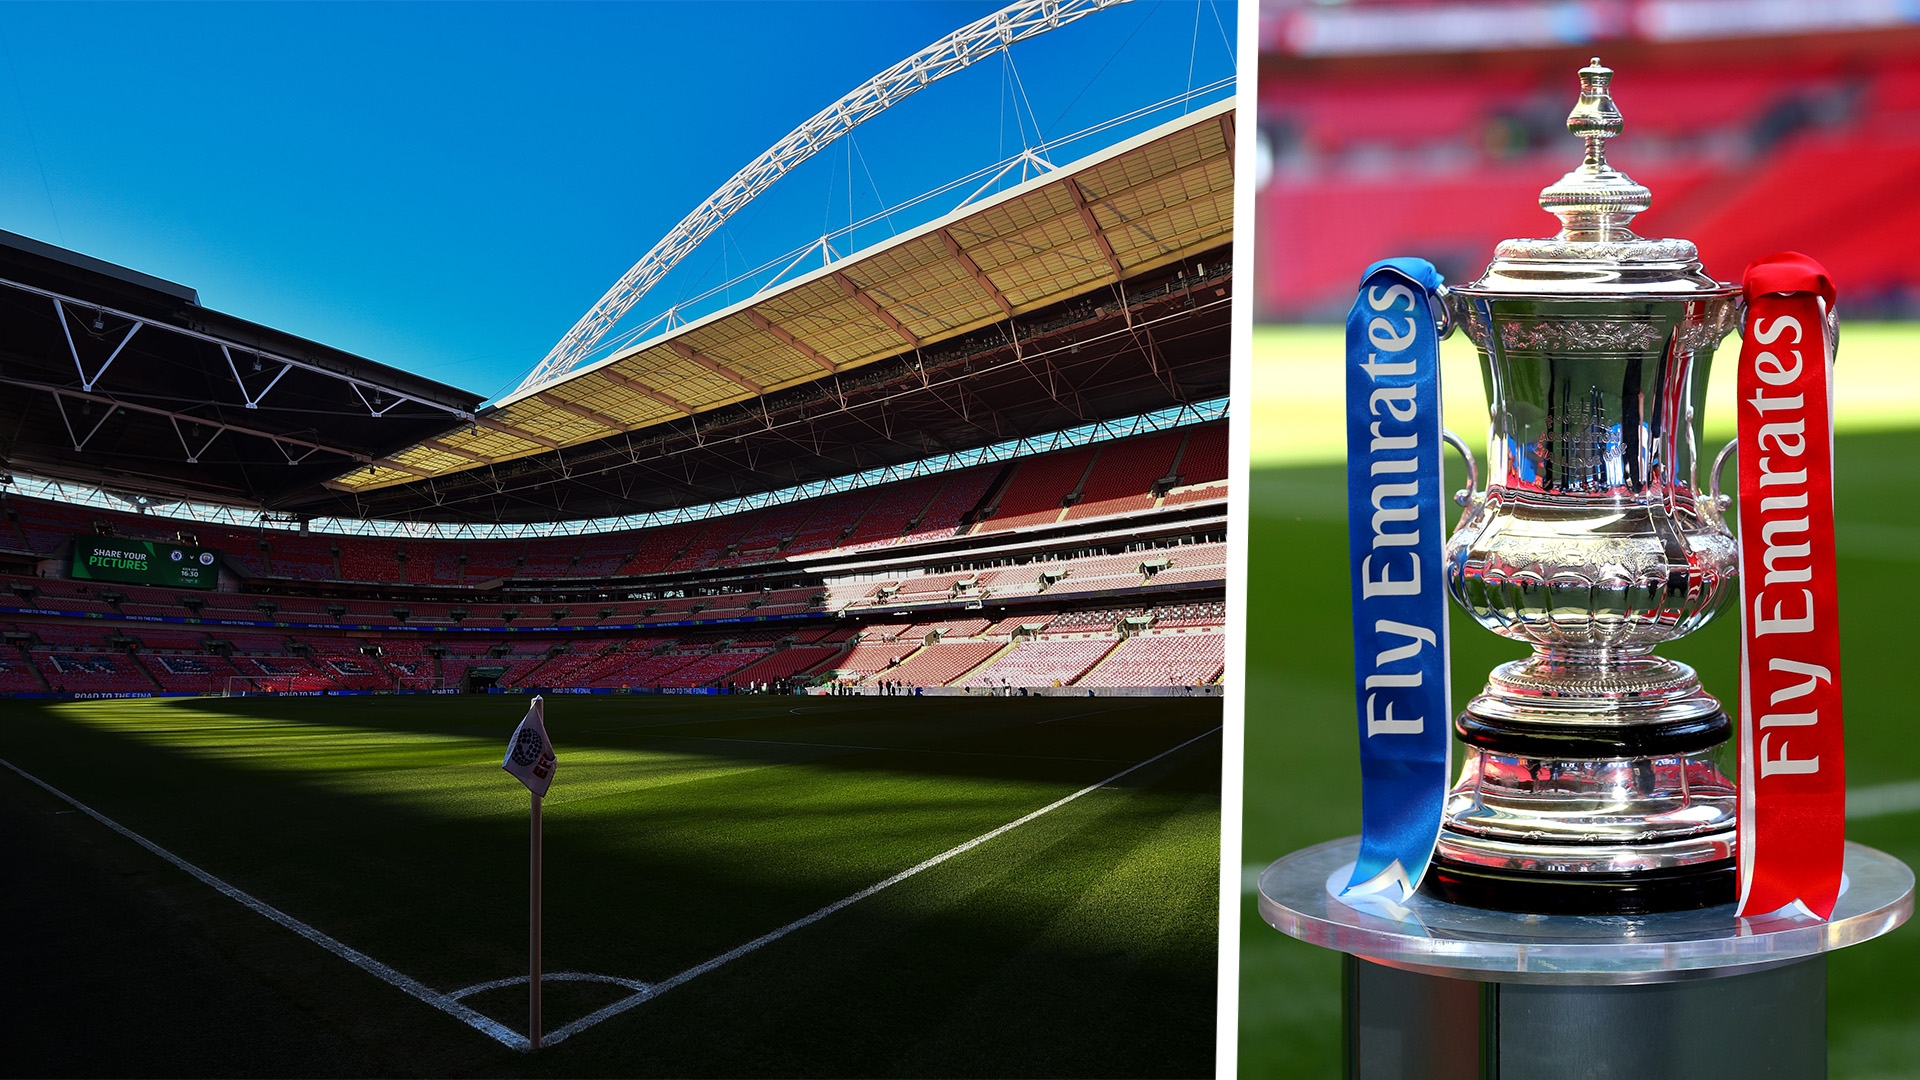 Why are the FA Cup semifinals played at Wembley?